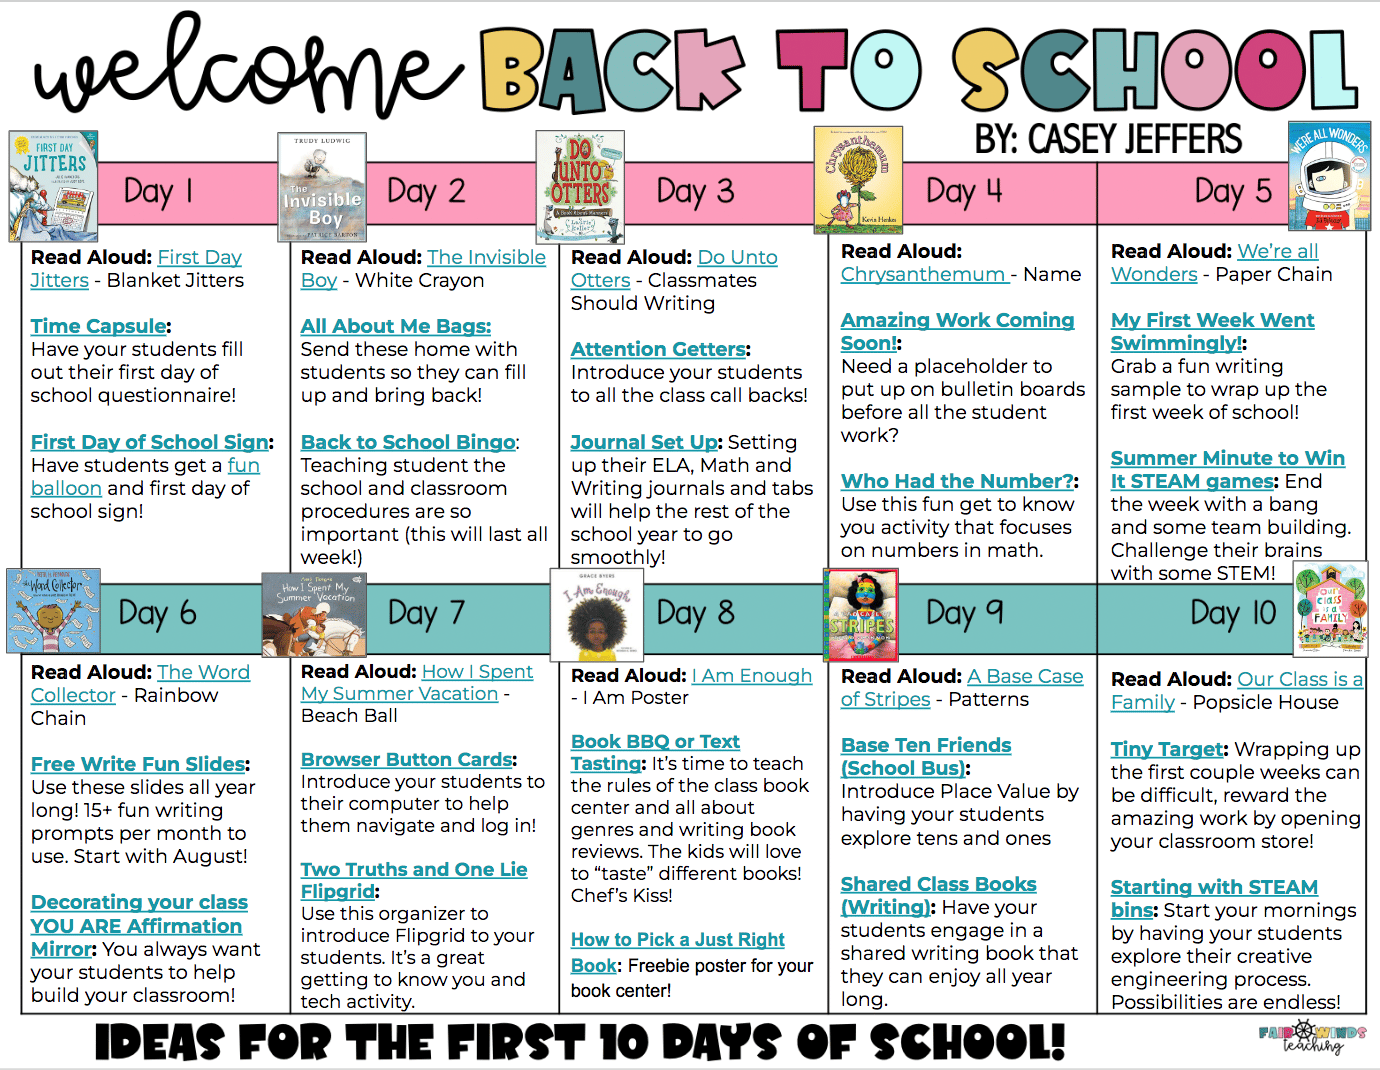 Back to School Ideas for the First 10 Days